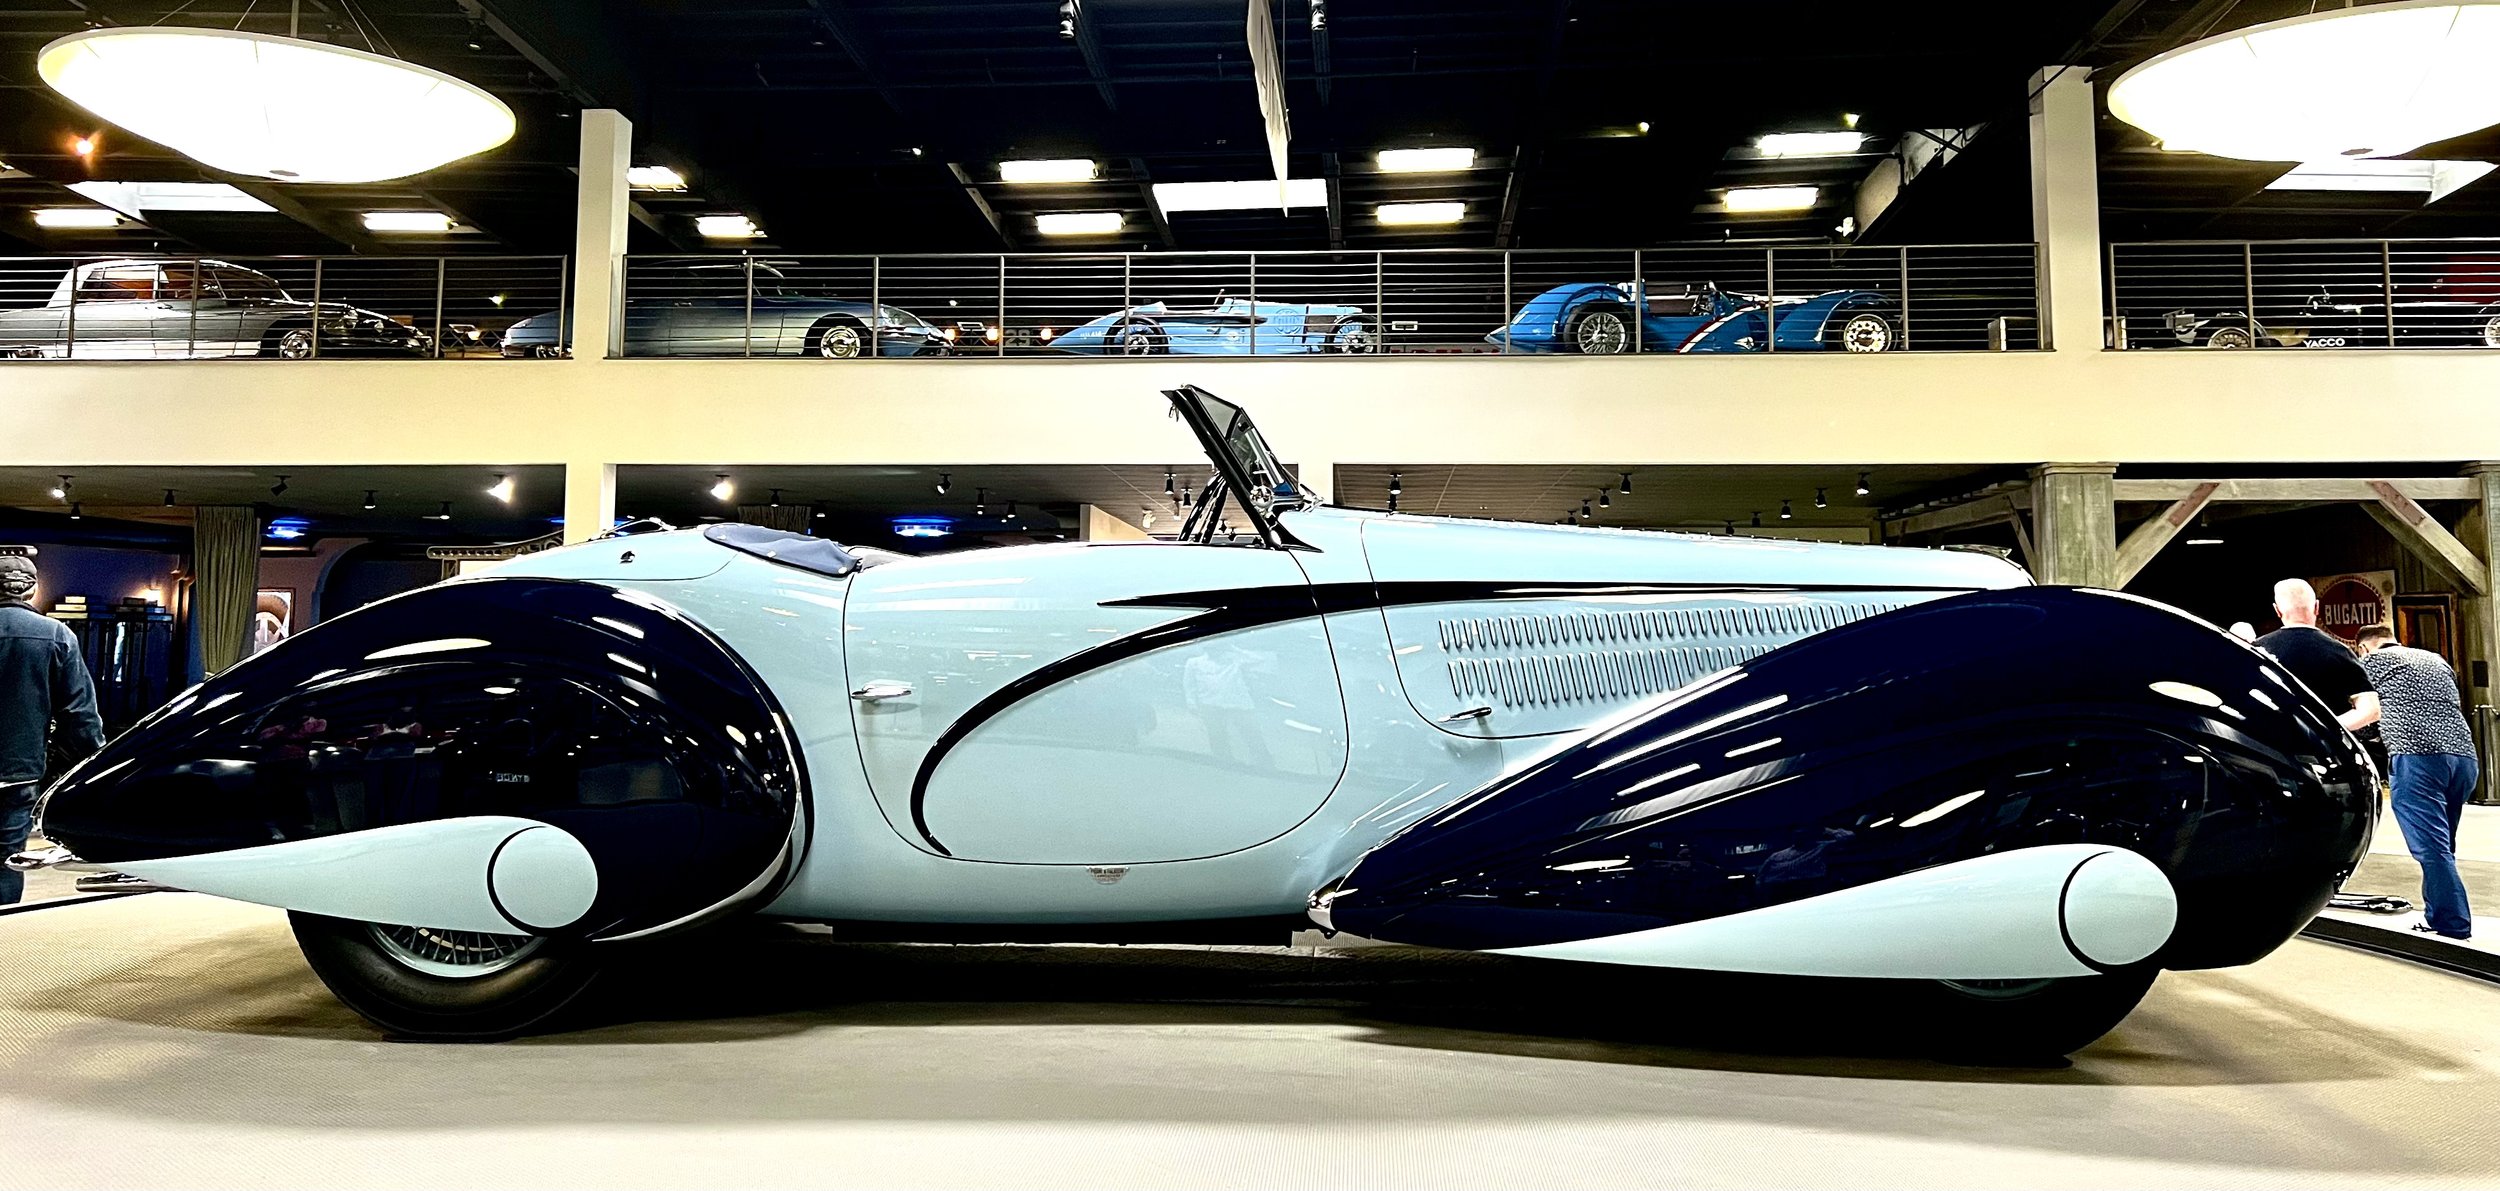 5-1938 Delahaye 135M Cabriolet by Figoni & Falaschi with Grand Prix race cars and Citroens above.jpg